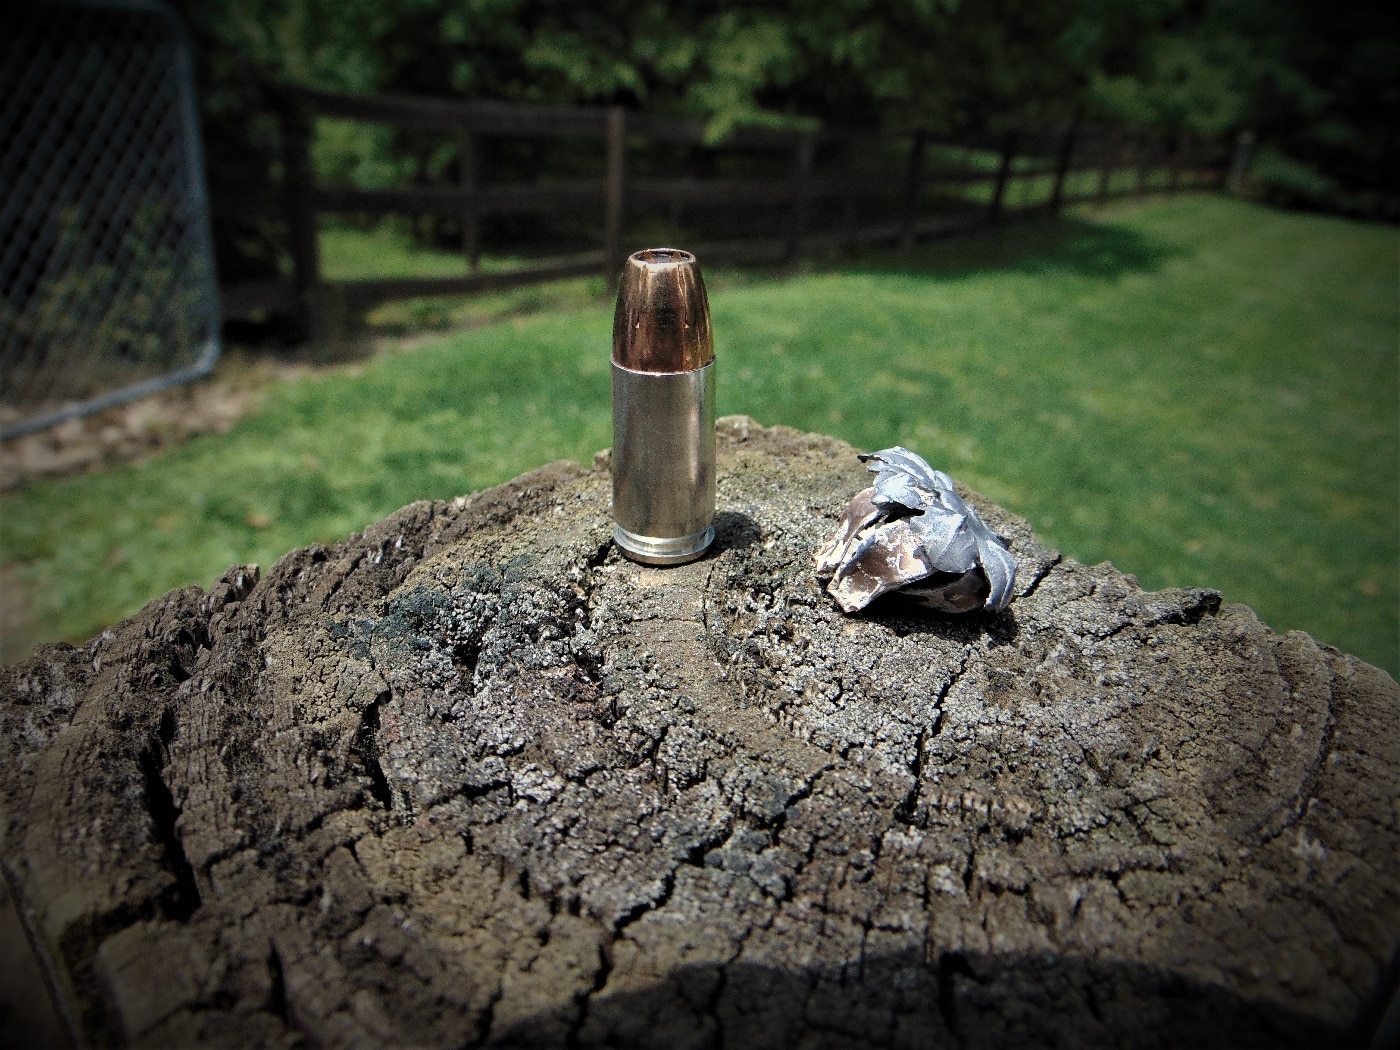 9mm bullet expanded